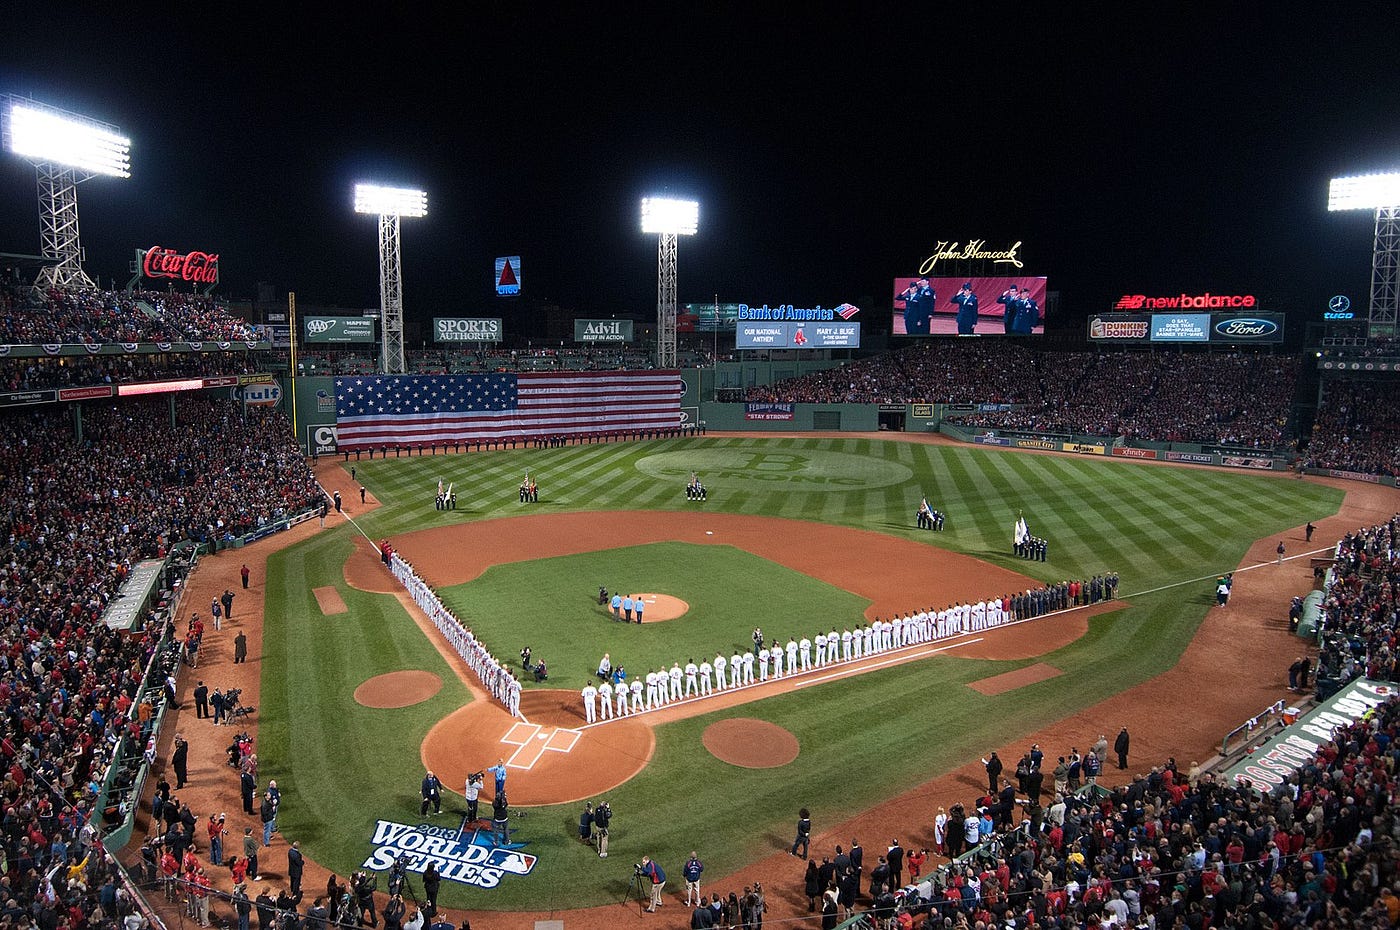 Opening Day at Fenway Park filled with excitement, nostalgia for Sox fans